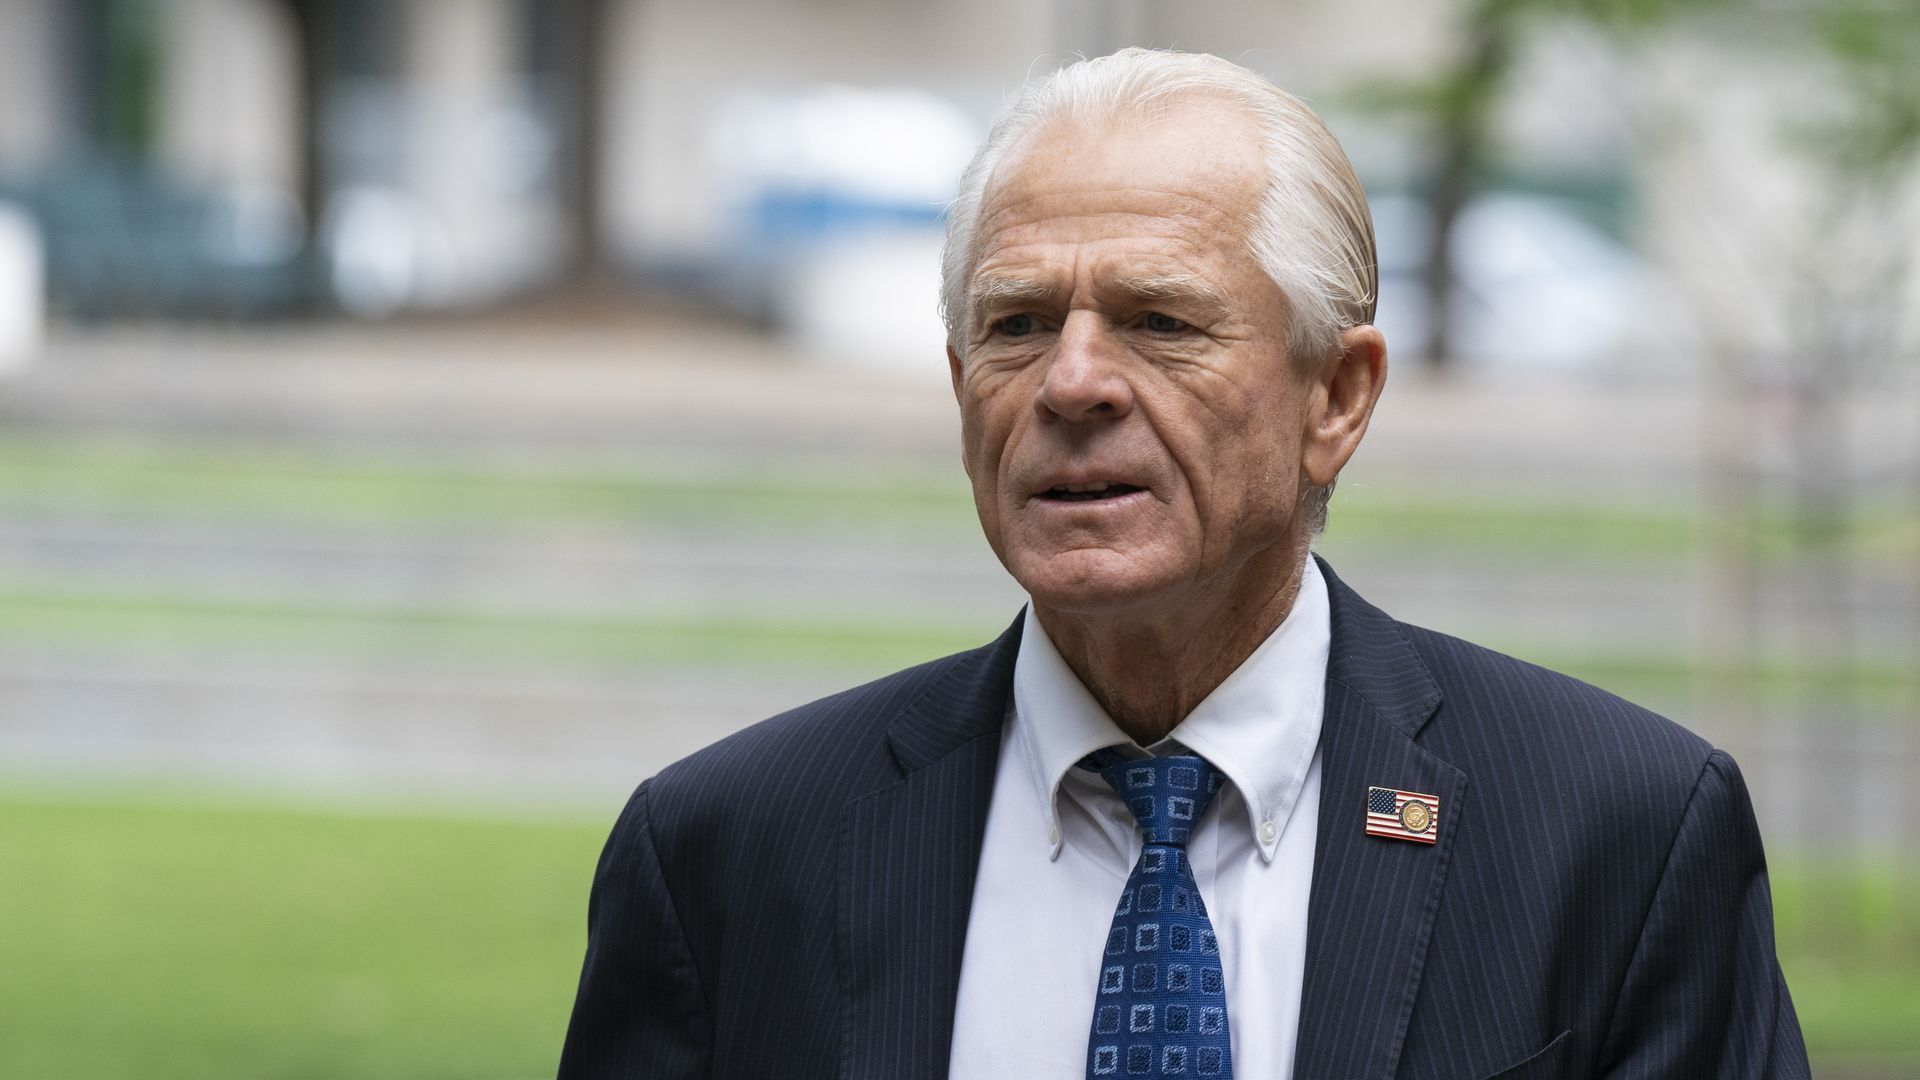 Peter Navarro, former White House trade adviser, arrives at federal court in Washington, DC, US, on Wednesday, Aug. 30, 2023.